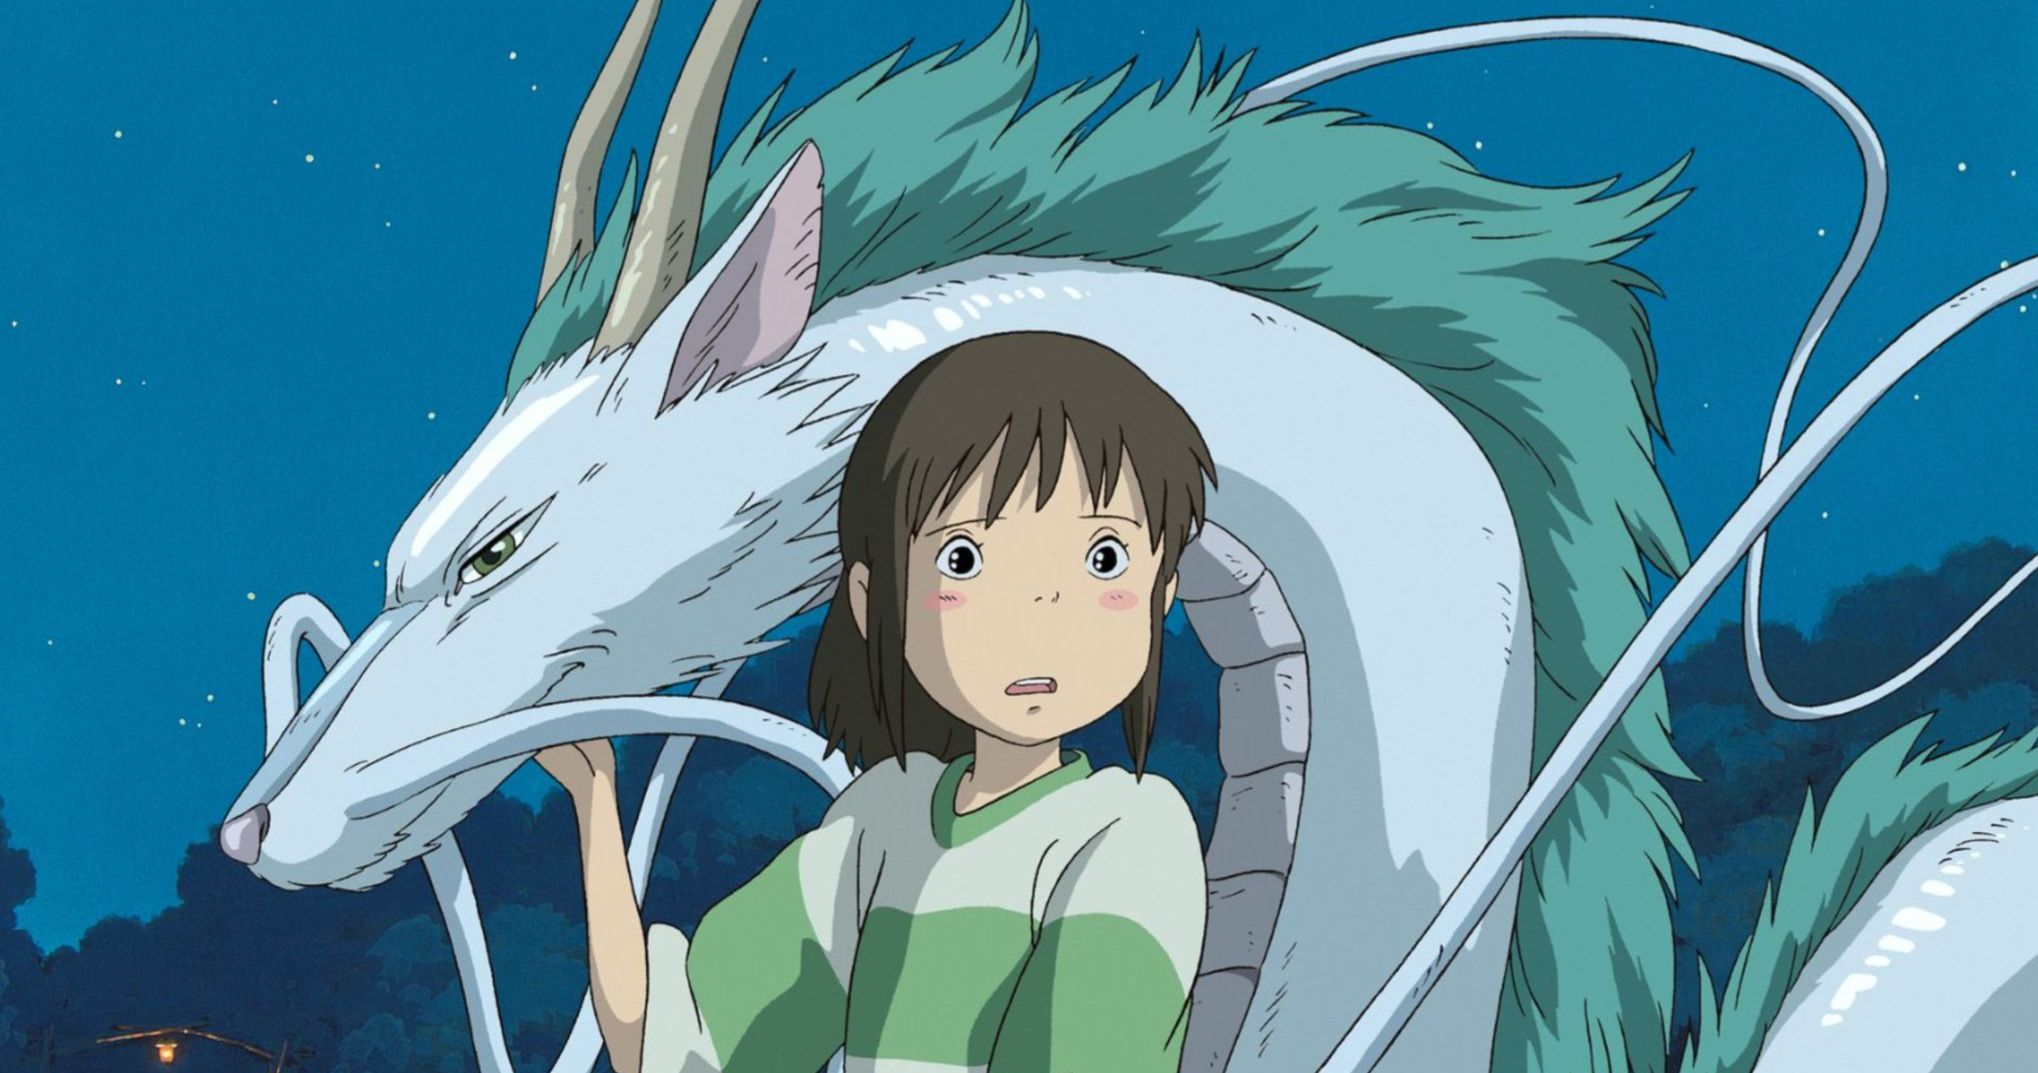 Spirited Away Gets the Deluxe Limited Collector's Edition Treatment in November